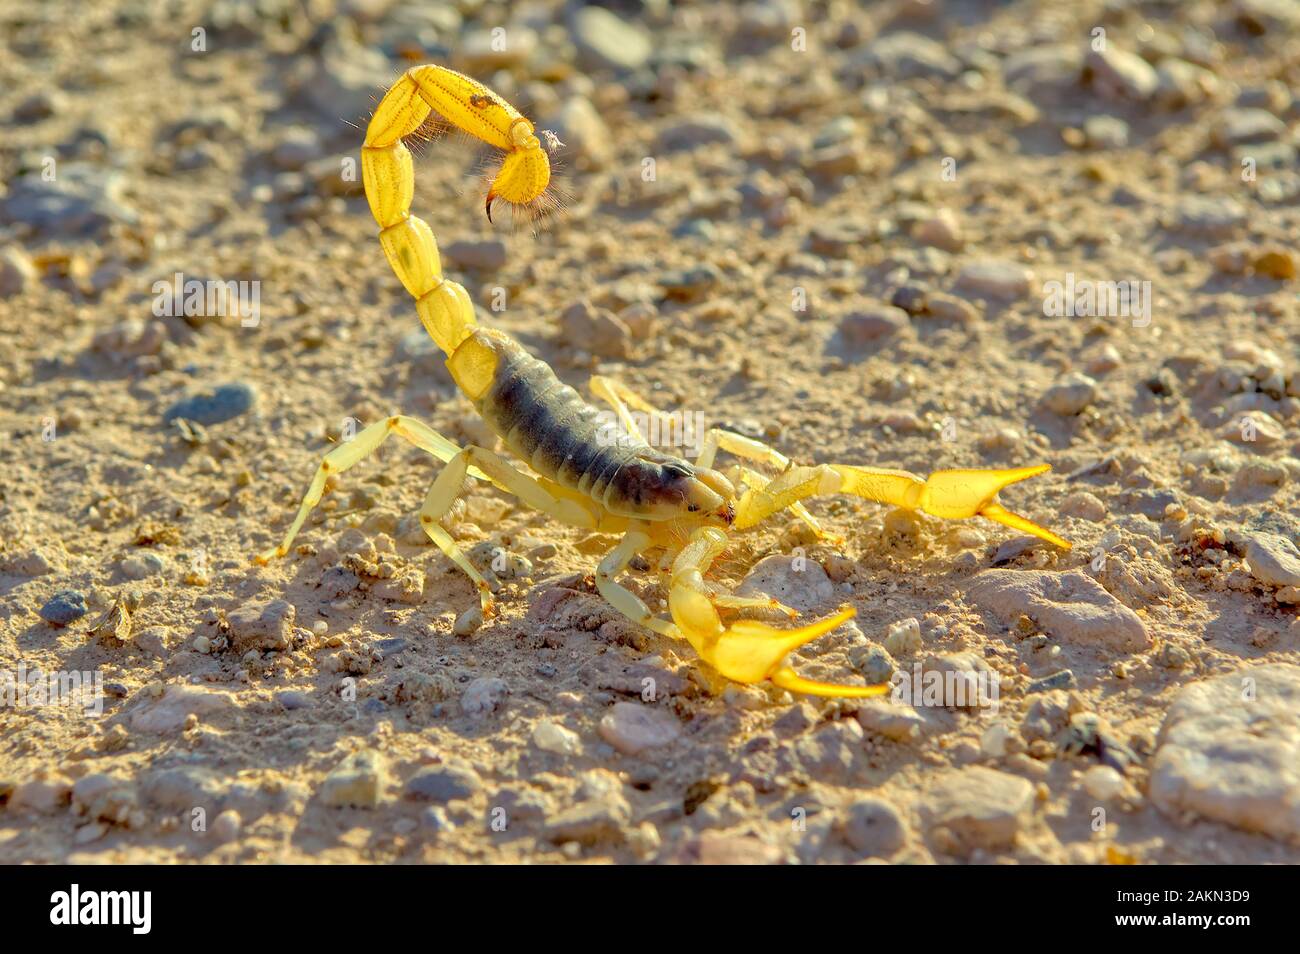 A Giant Hairy Scorpion native to Arizona in a defensive posture ready to sting if provoked. Stock Photo